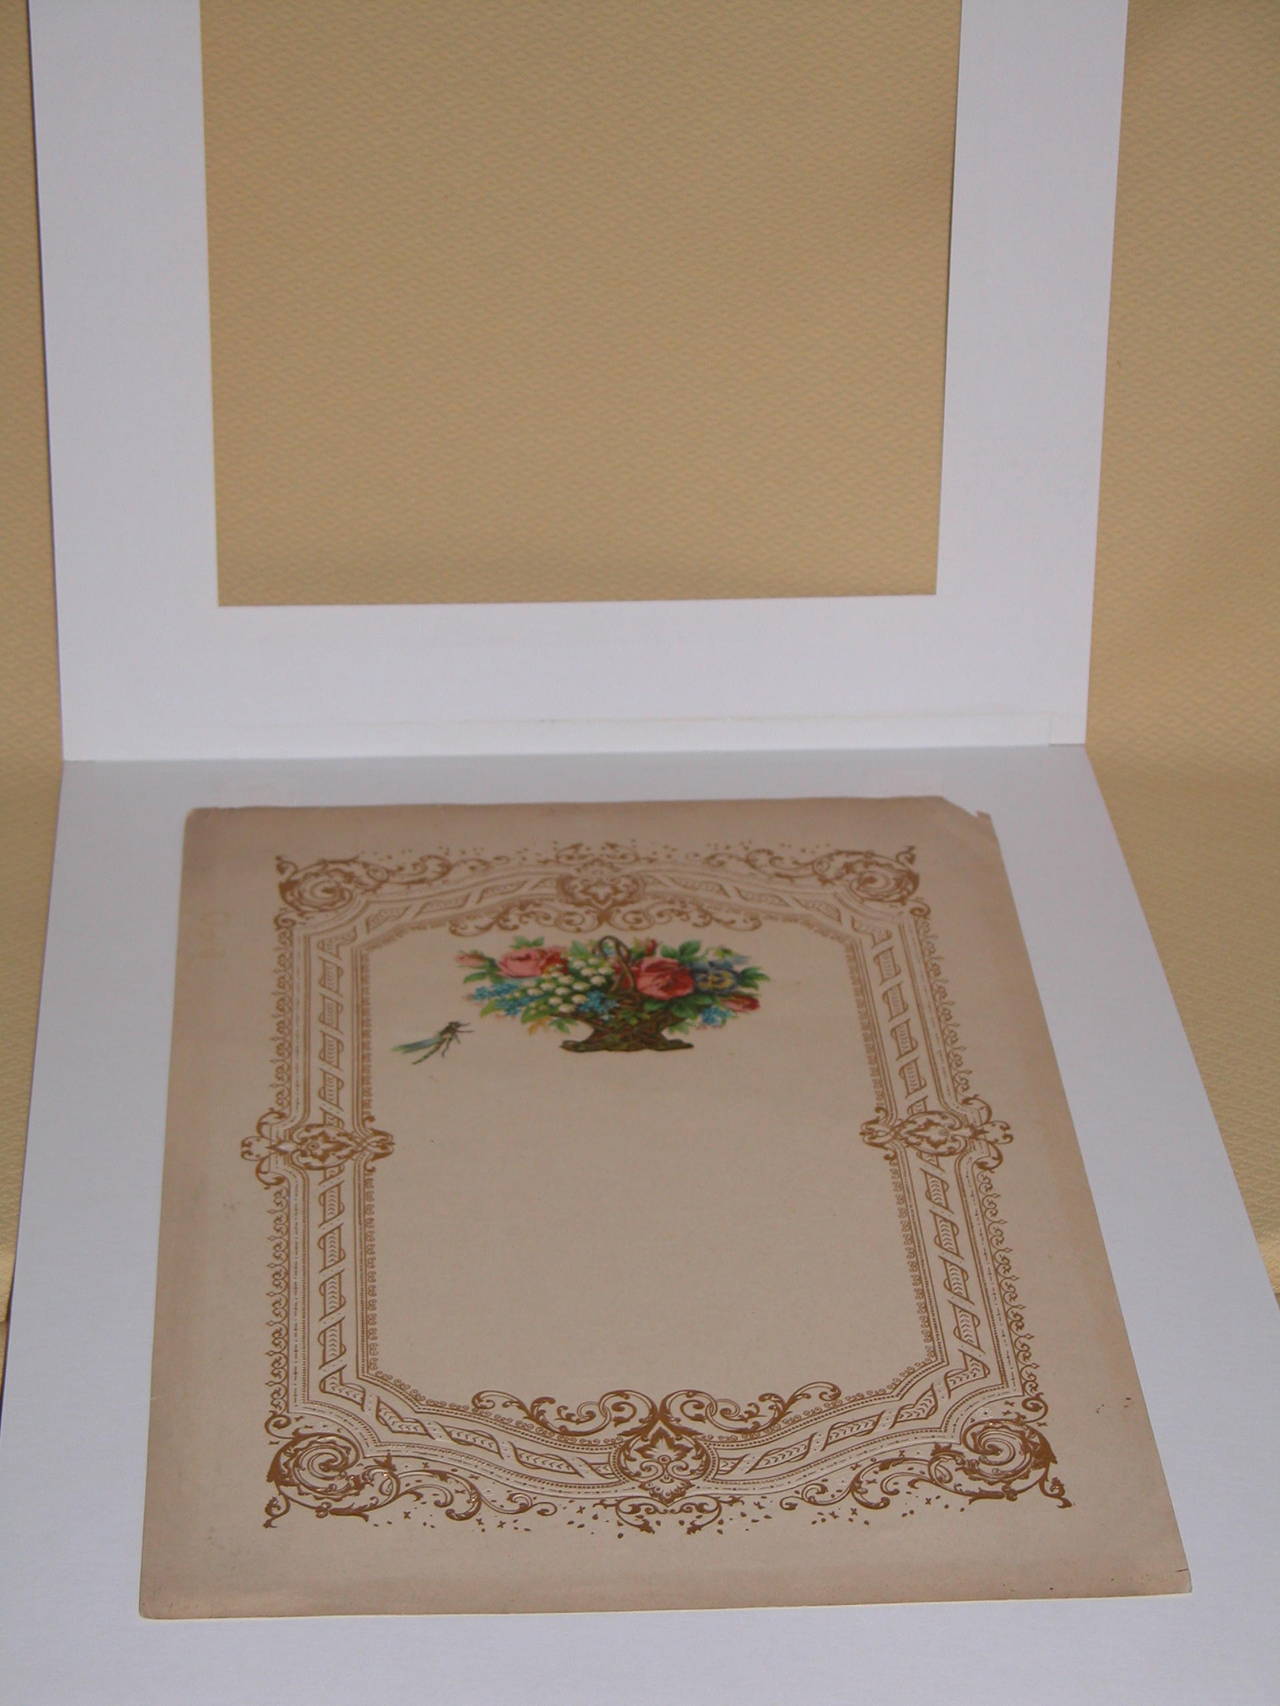 Exceptionally large and in near mint condition Valentines day card, dated circa 1850 in pencil on the reverse side. Custom cut gold mat and ready for your frame. The actual Valentine is 12.5